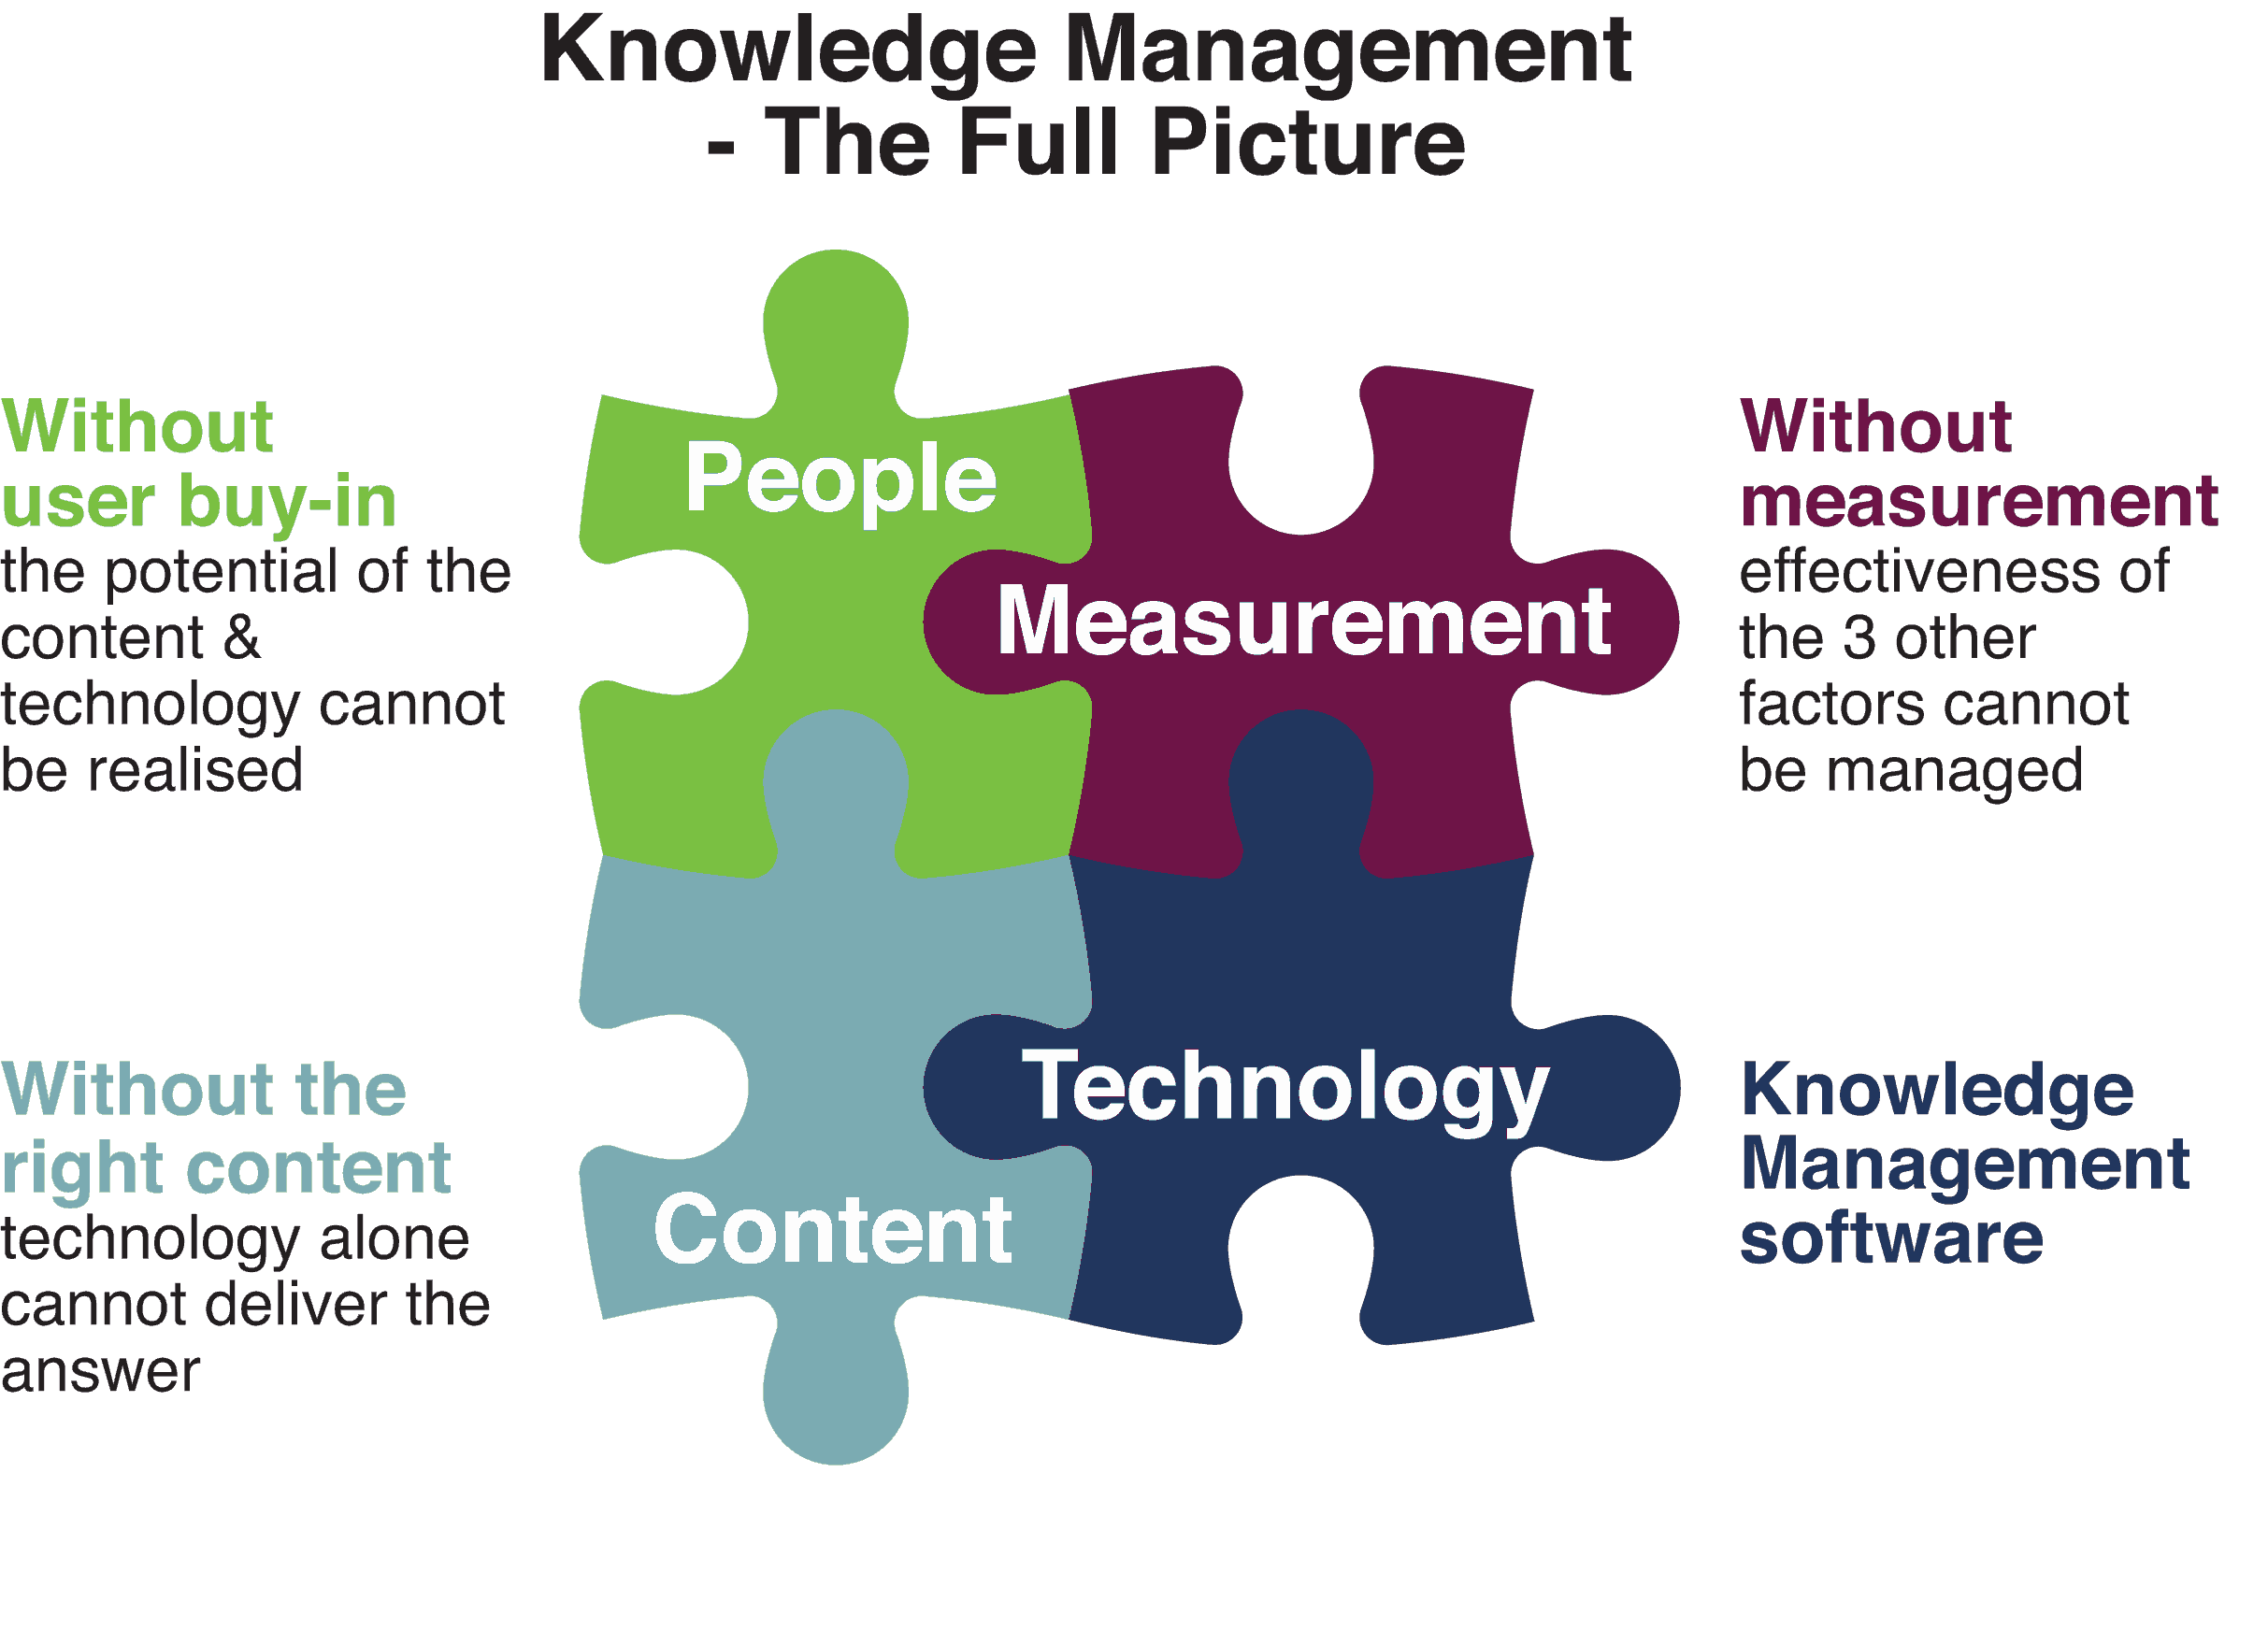 An image of the Knowledge Management puzzle